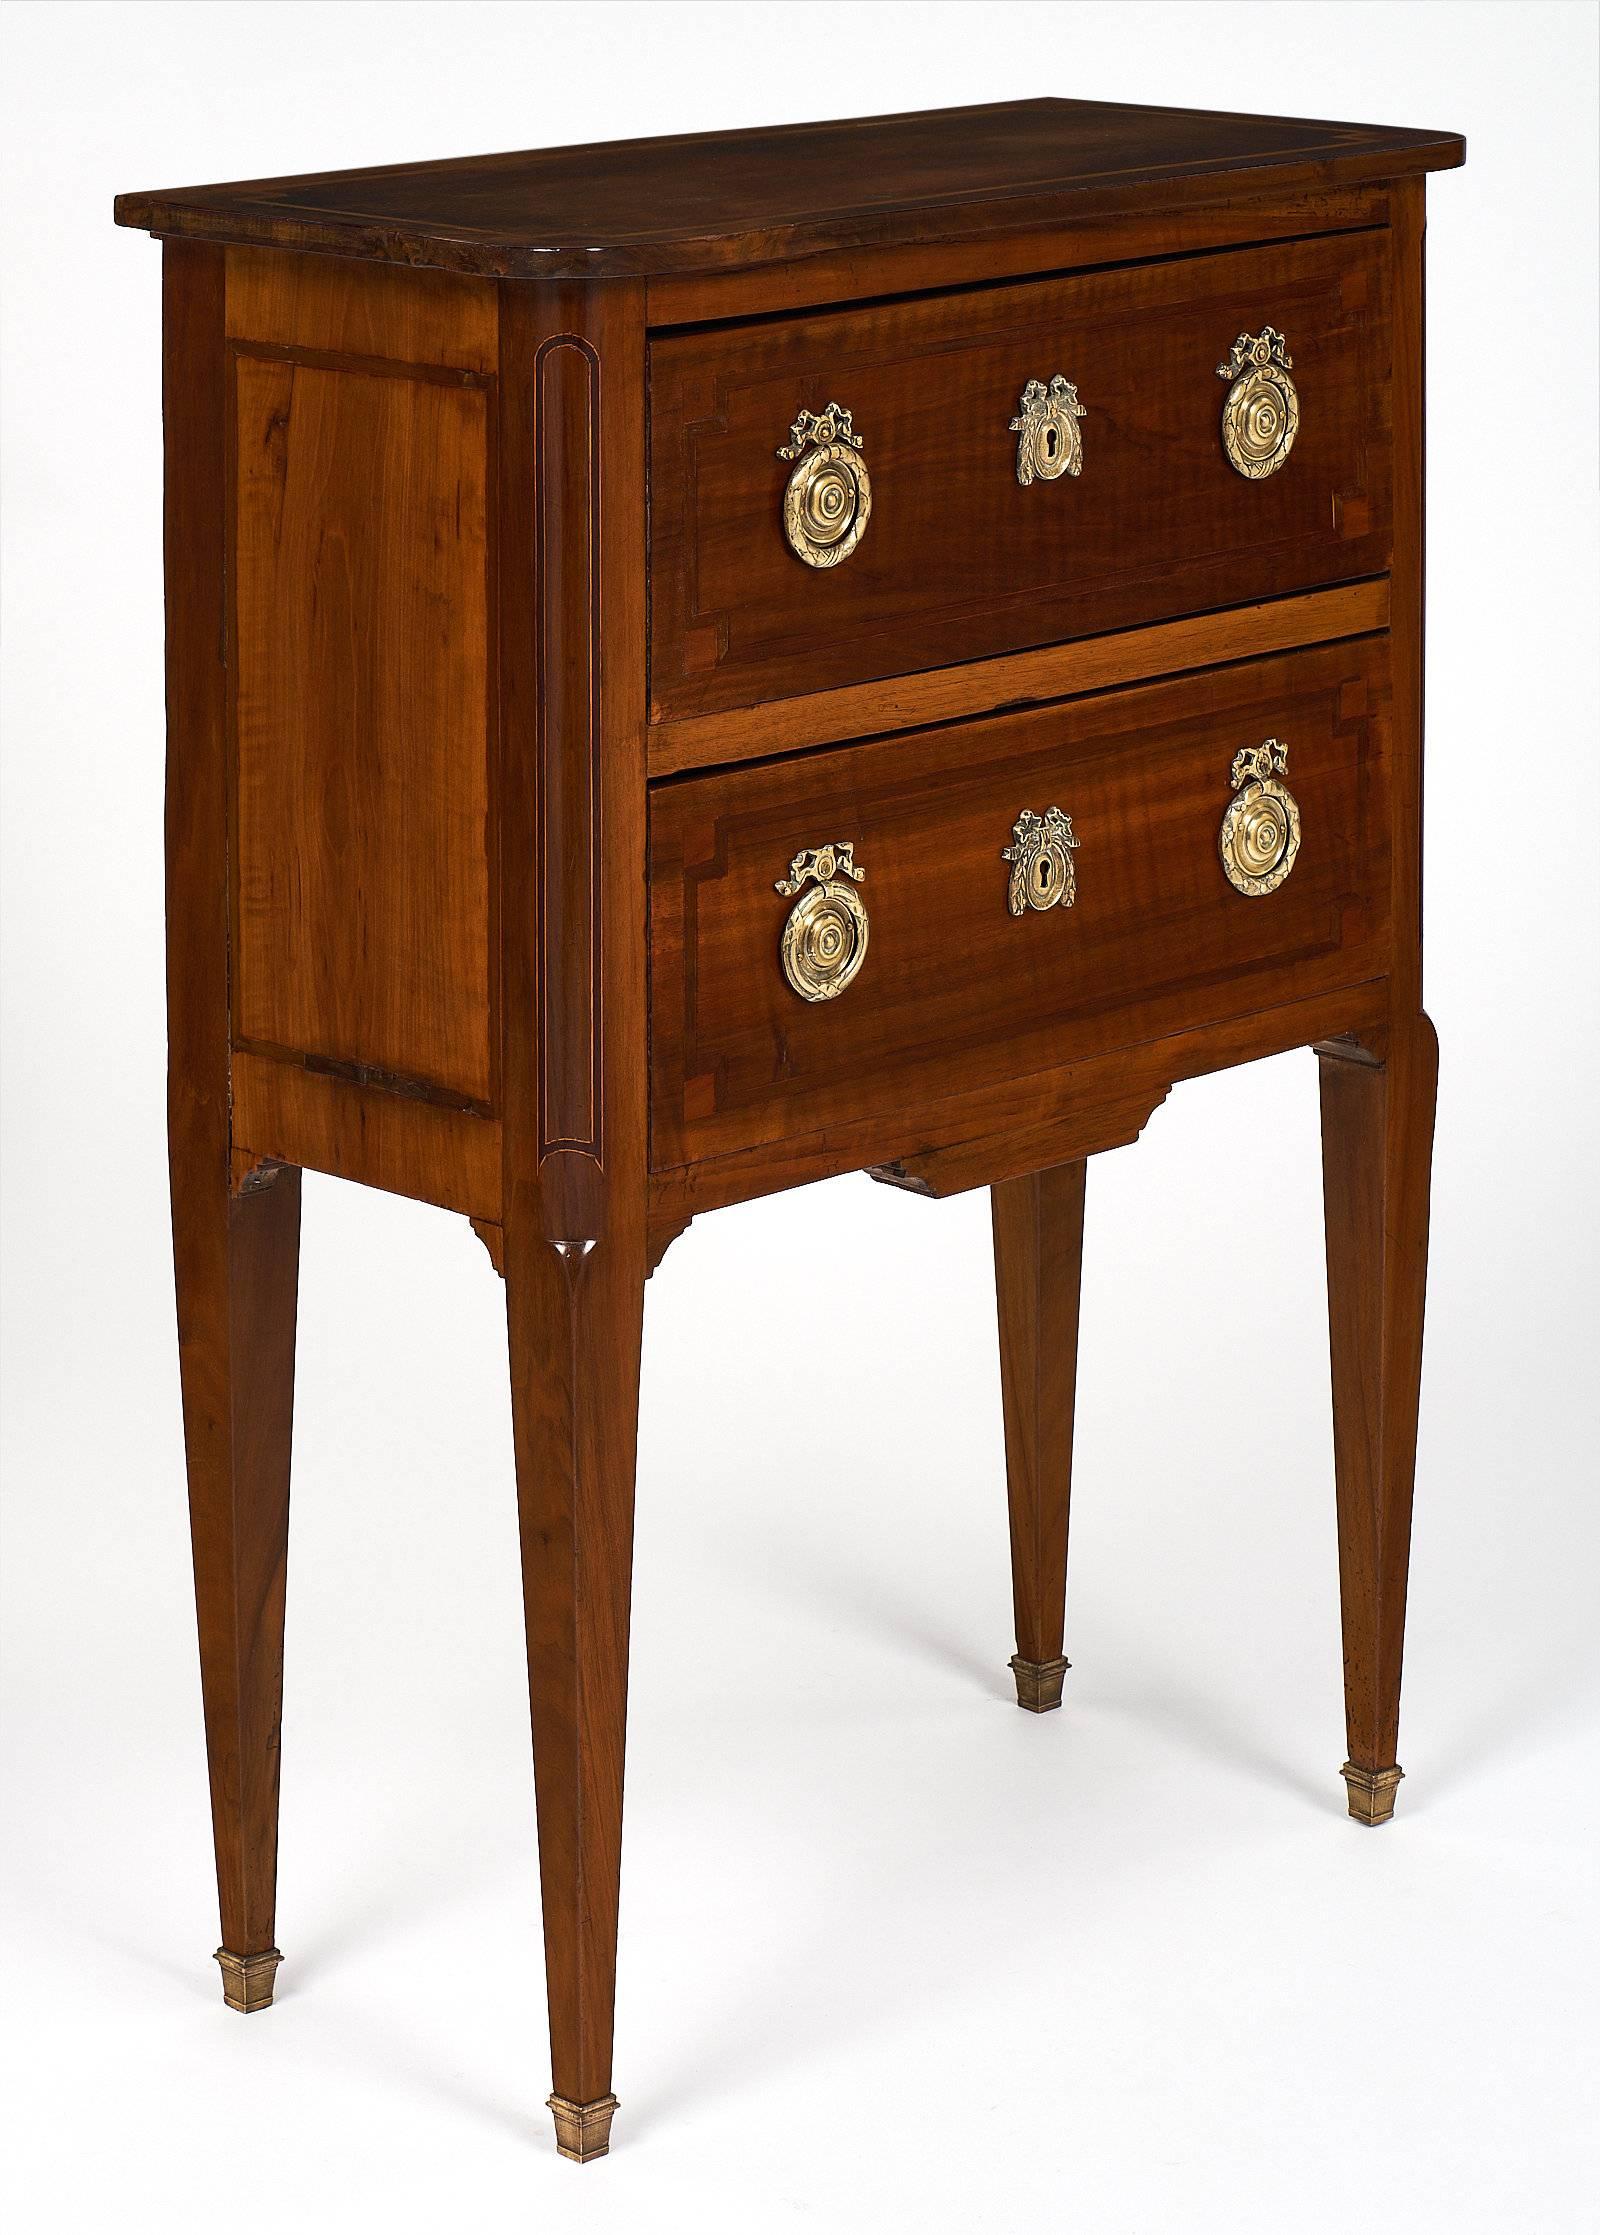 This perfectly proportioned Louis XVI style piece is made from mahogany, with hand-crafted inlays on each drawer, sides, and top. The finely cast brass hardware and escutcheons are all original. The long, tapered legs are each capped with brass as